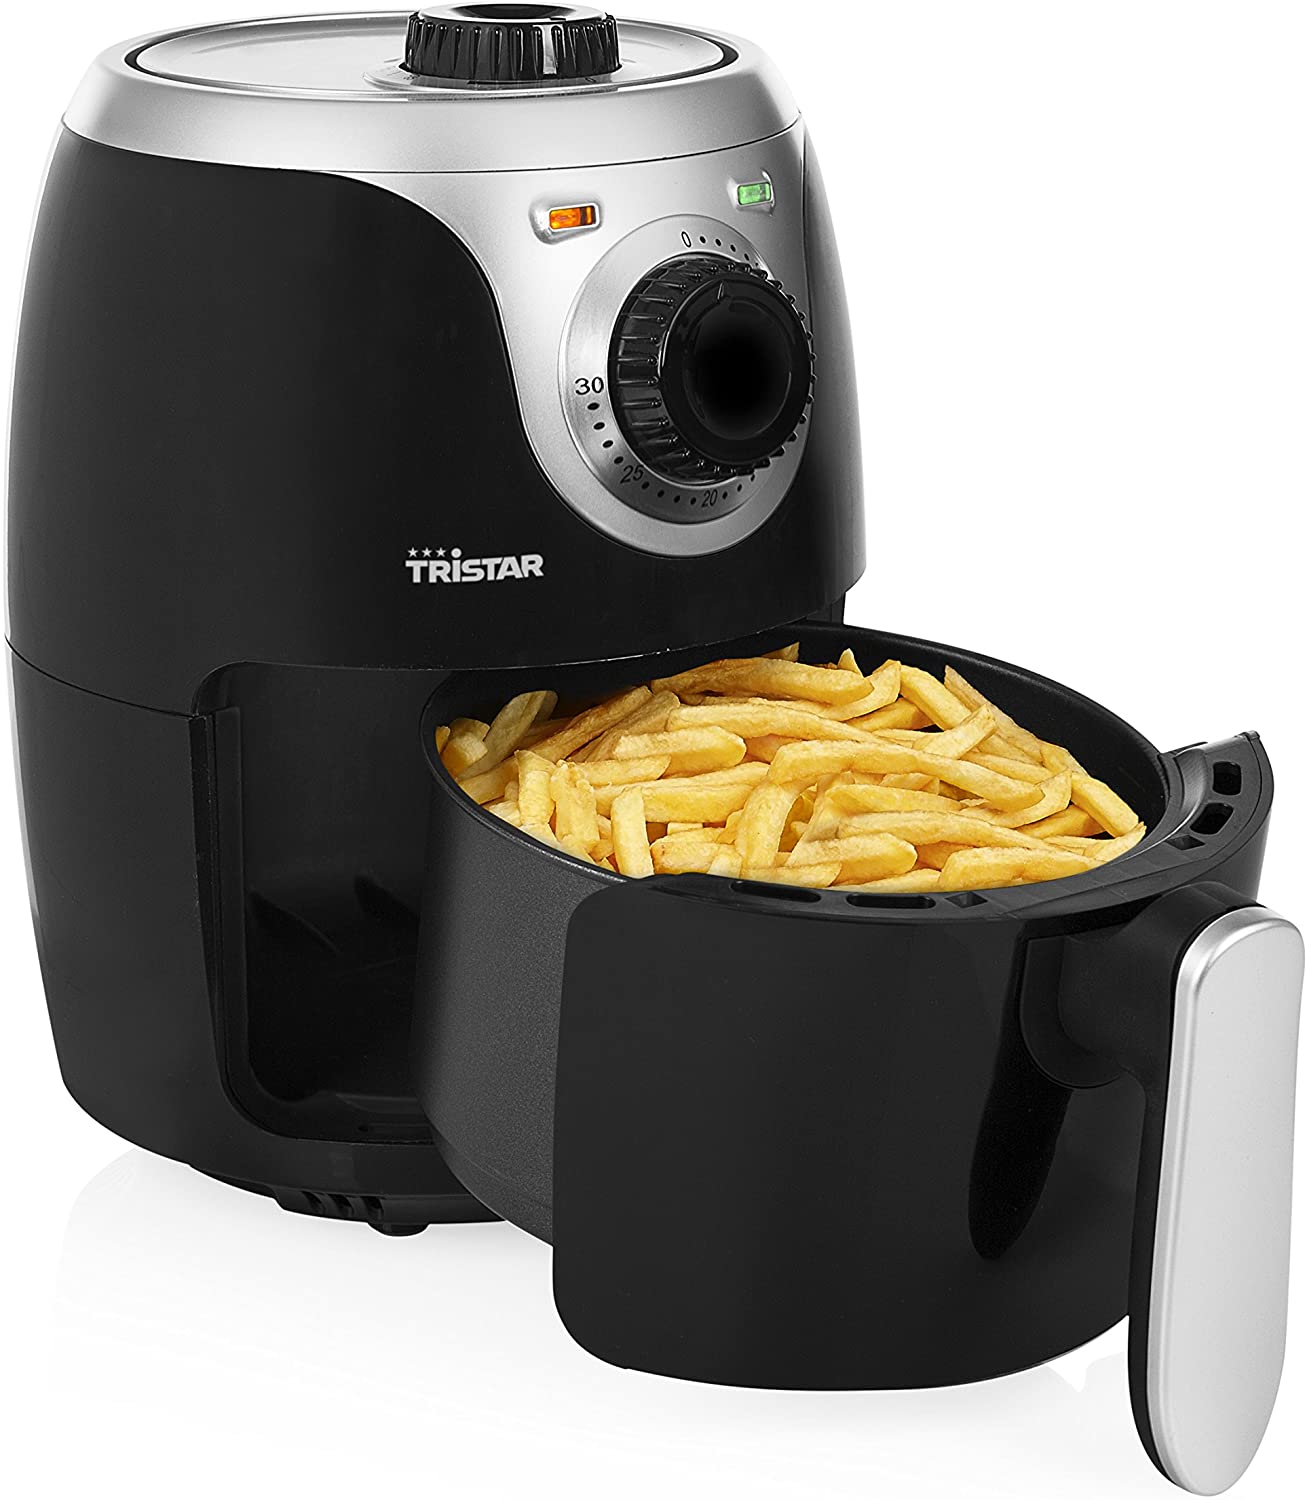 Tristar hot air fryer / crispy fryer with adjustable thermostat and timer | without grease-easy to clean - with 2 liter capacity, FR-6980, 2.0 liter